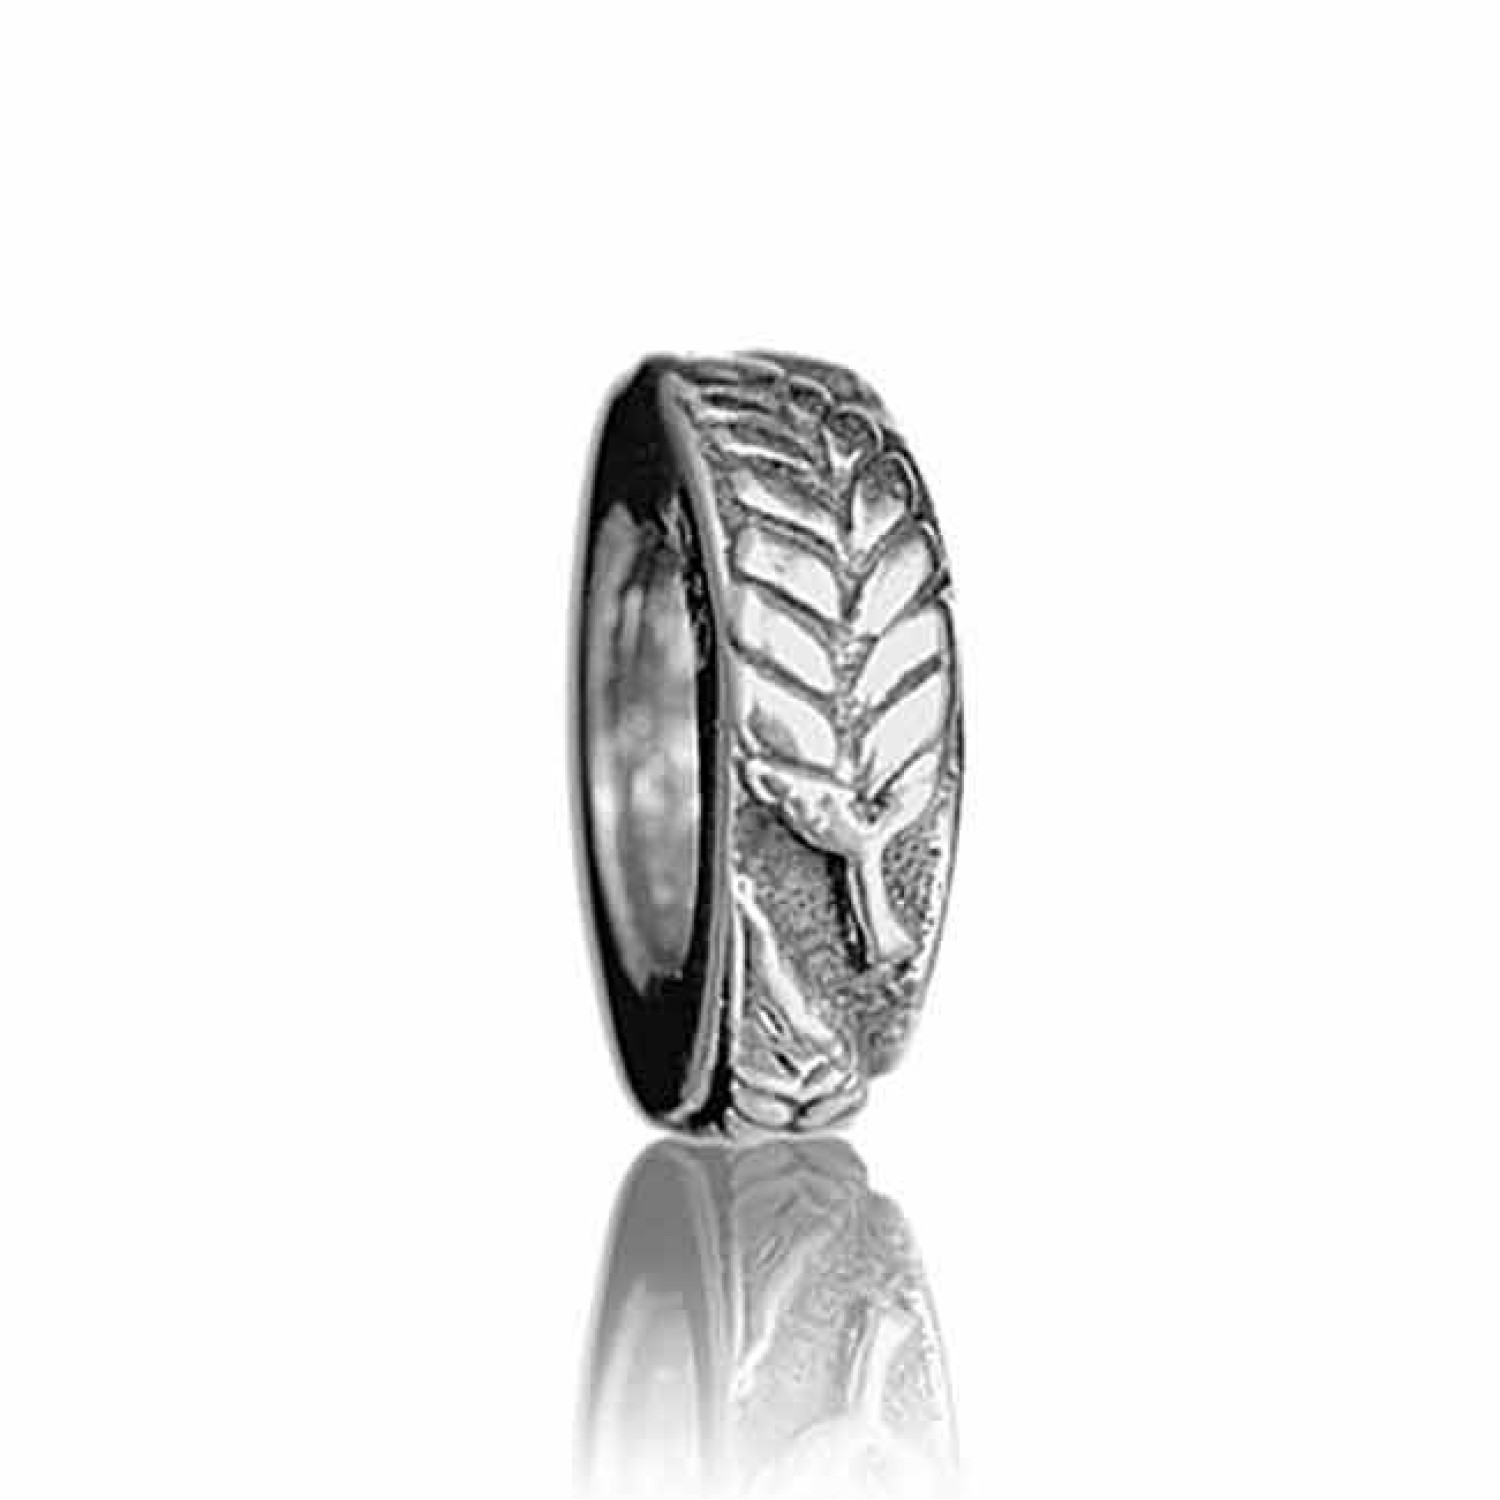 LKS002 Evolve NZ Charm Silver Fern Spacer. The Silver Fern is a recognised and much treasured symbol of New Zealand. This iconic spacer charm is a subtle tribute to the beautiful land of Aotearoa.  Oxipay is simply the easier way to pay - use Oxipay and w